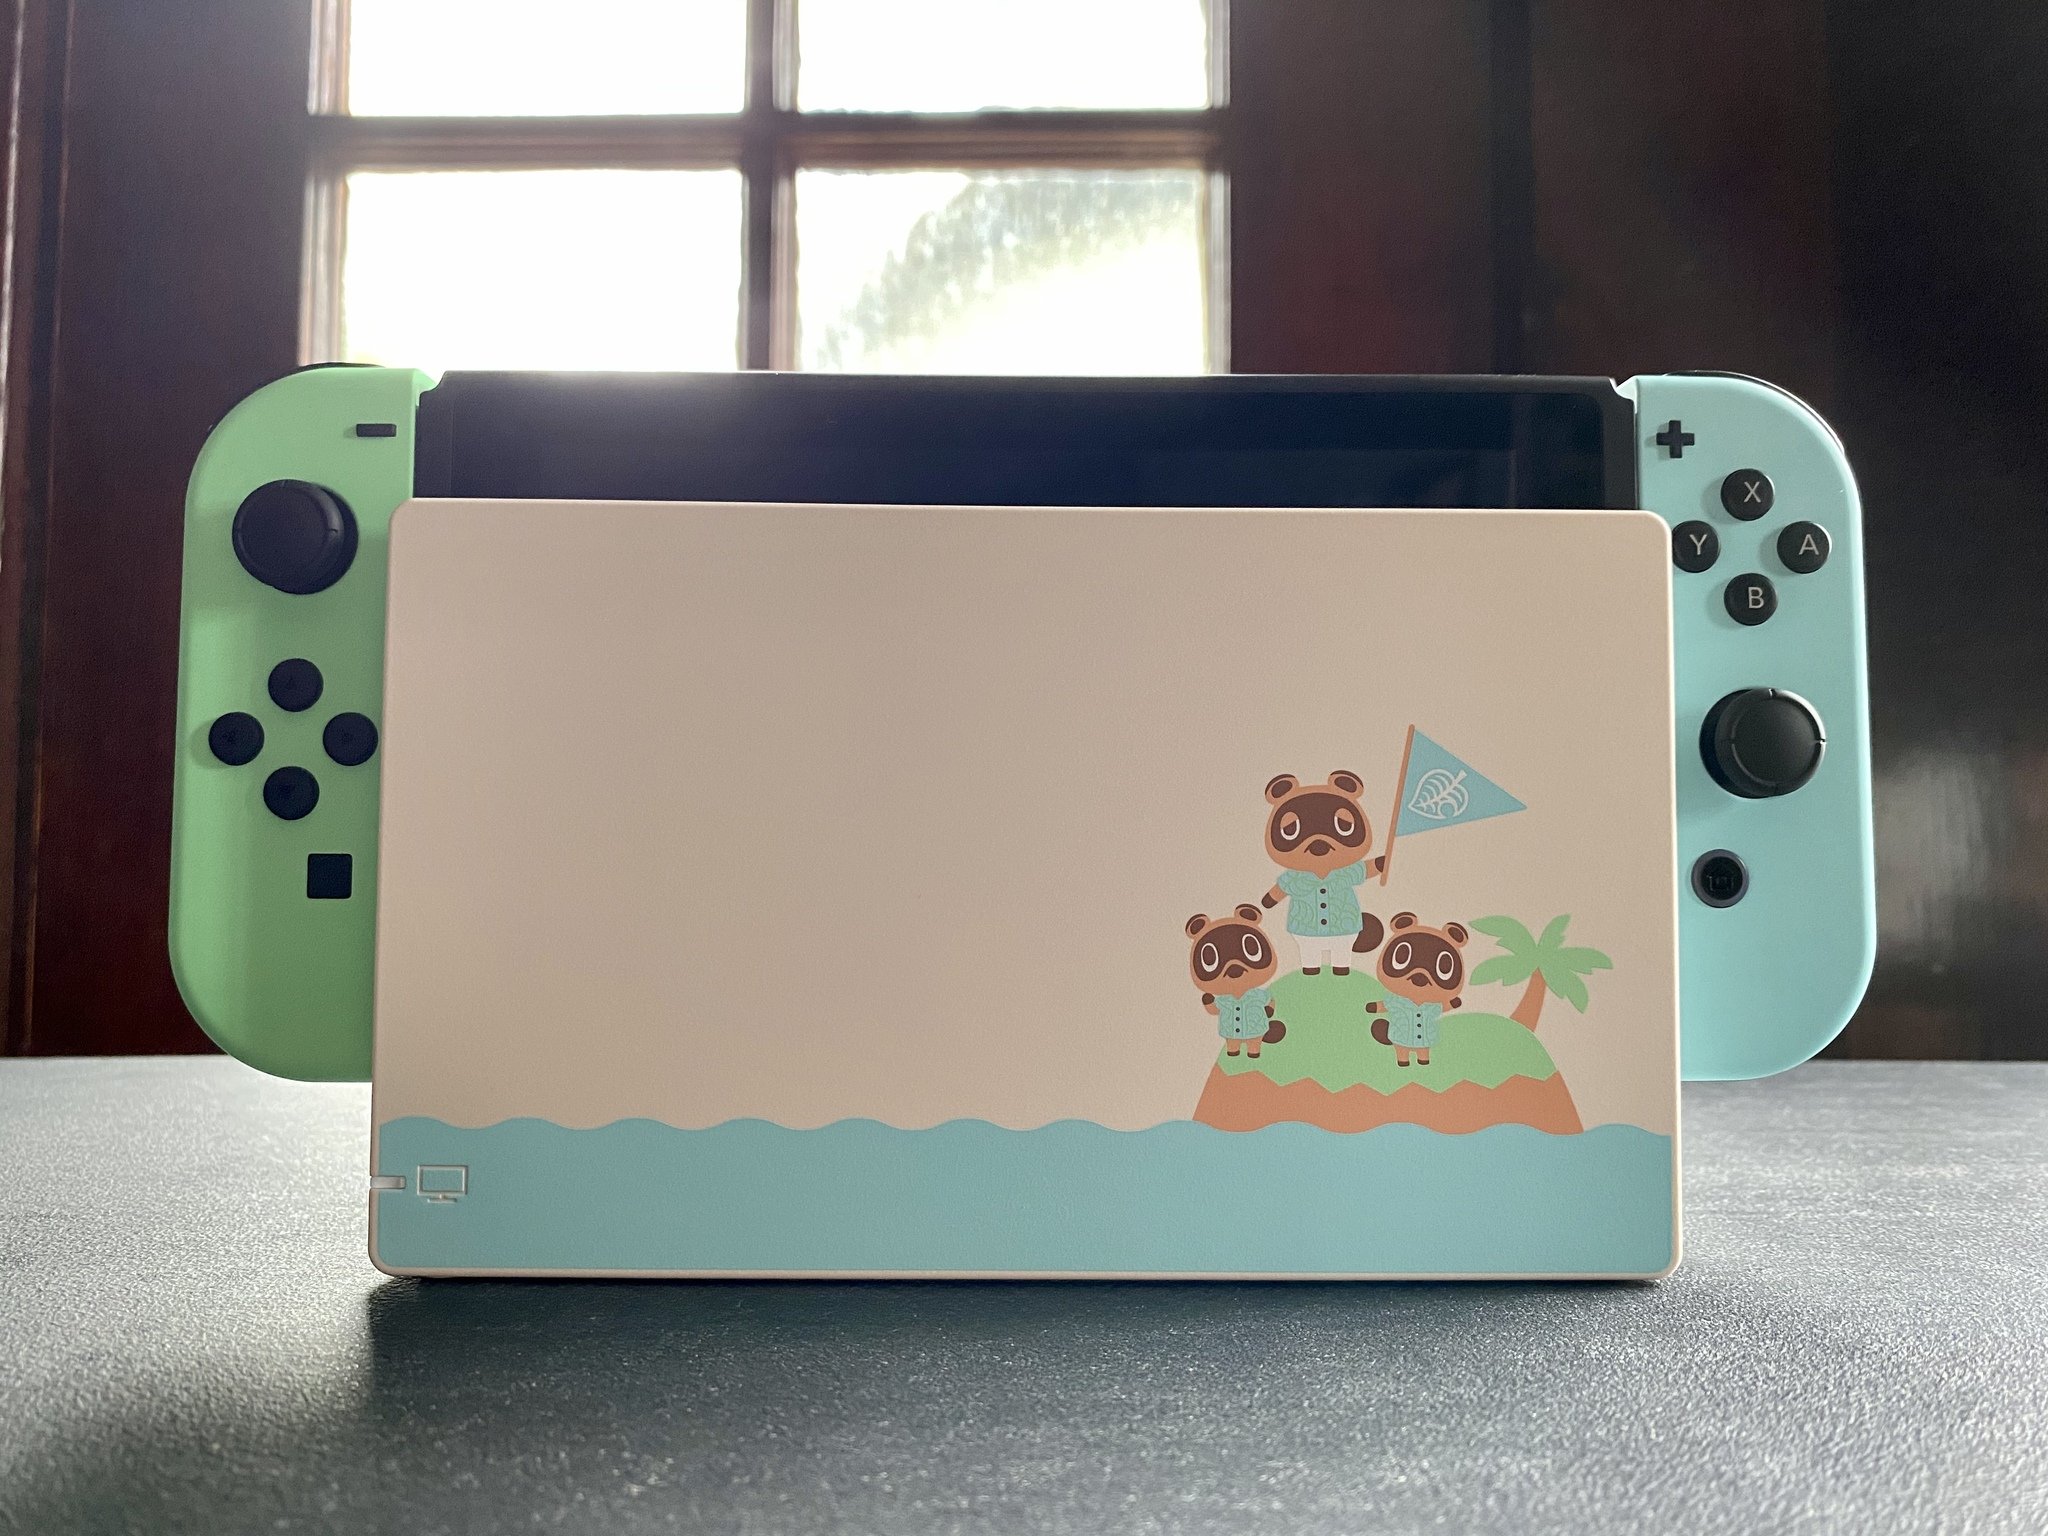 nintendo switch limited edition